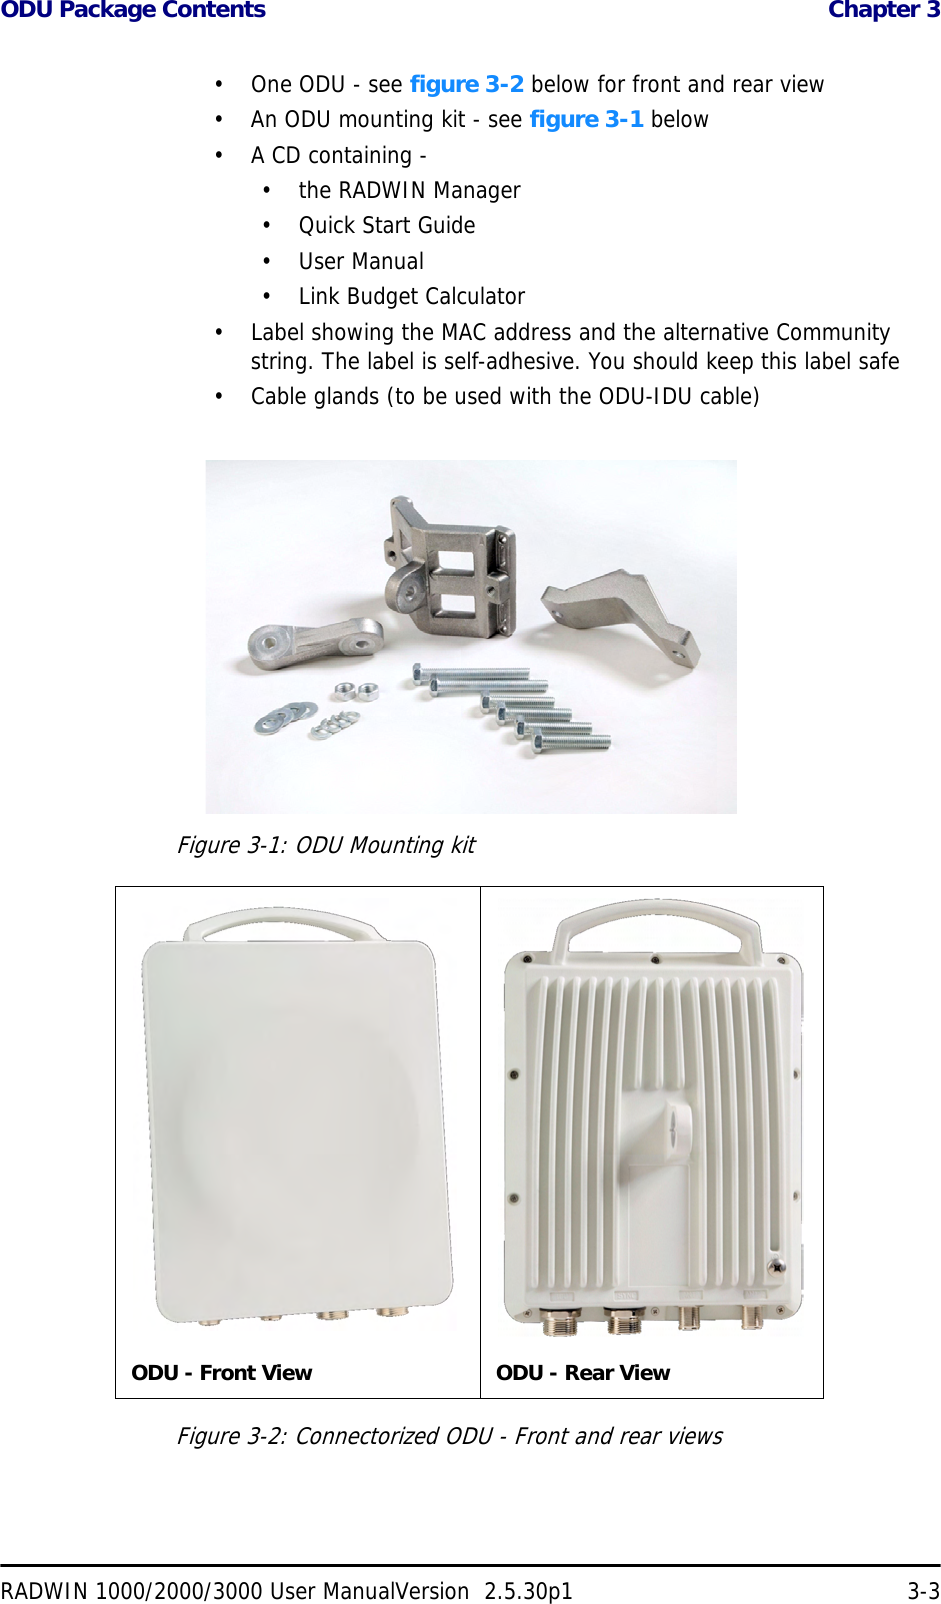 ODU Package Contents  Chapter 3RADWIN 1000/2000/3000 User ManualVersion  2.5.30p1 3-3• One ODU - see figure 3-2 below for front and rear view• An ODU mounting kit - see figure 3-1 below• A CD containing -• the RADWIN Manager•Quick Start Guide• User Manual• Link Budget Calculator• Label showing the MAC address and the alternative Community string. The label is self-adhesive. You should keep this label safe• Cable glands (to be used with the ODU-IDU cable)Figure 3-1: ODU Mounting kitFigure 3-2: Connectorized ODU - Front and rear viewsODU - Front View ODU - Rear View